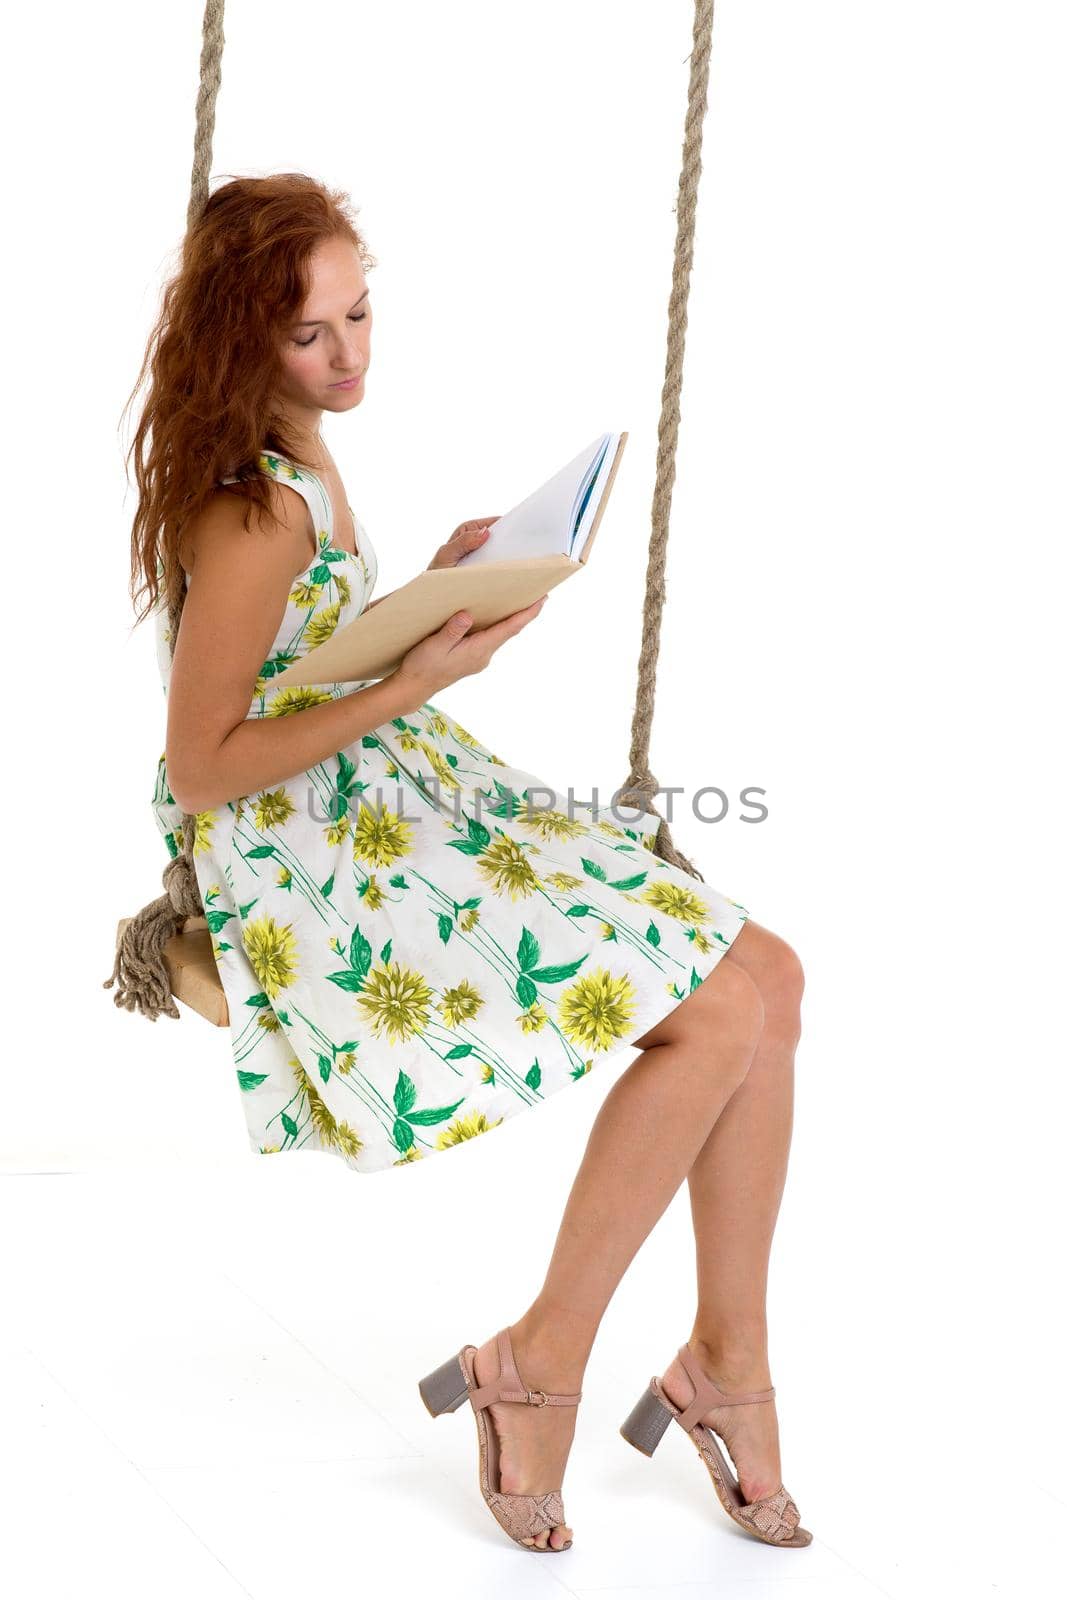 Happy young woman reading book on swing. Smiling woman wearing summer dress sitting on rope swing against white background. Portrait of beautiful girl posing in studio